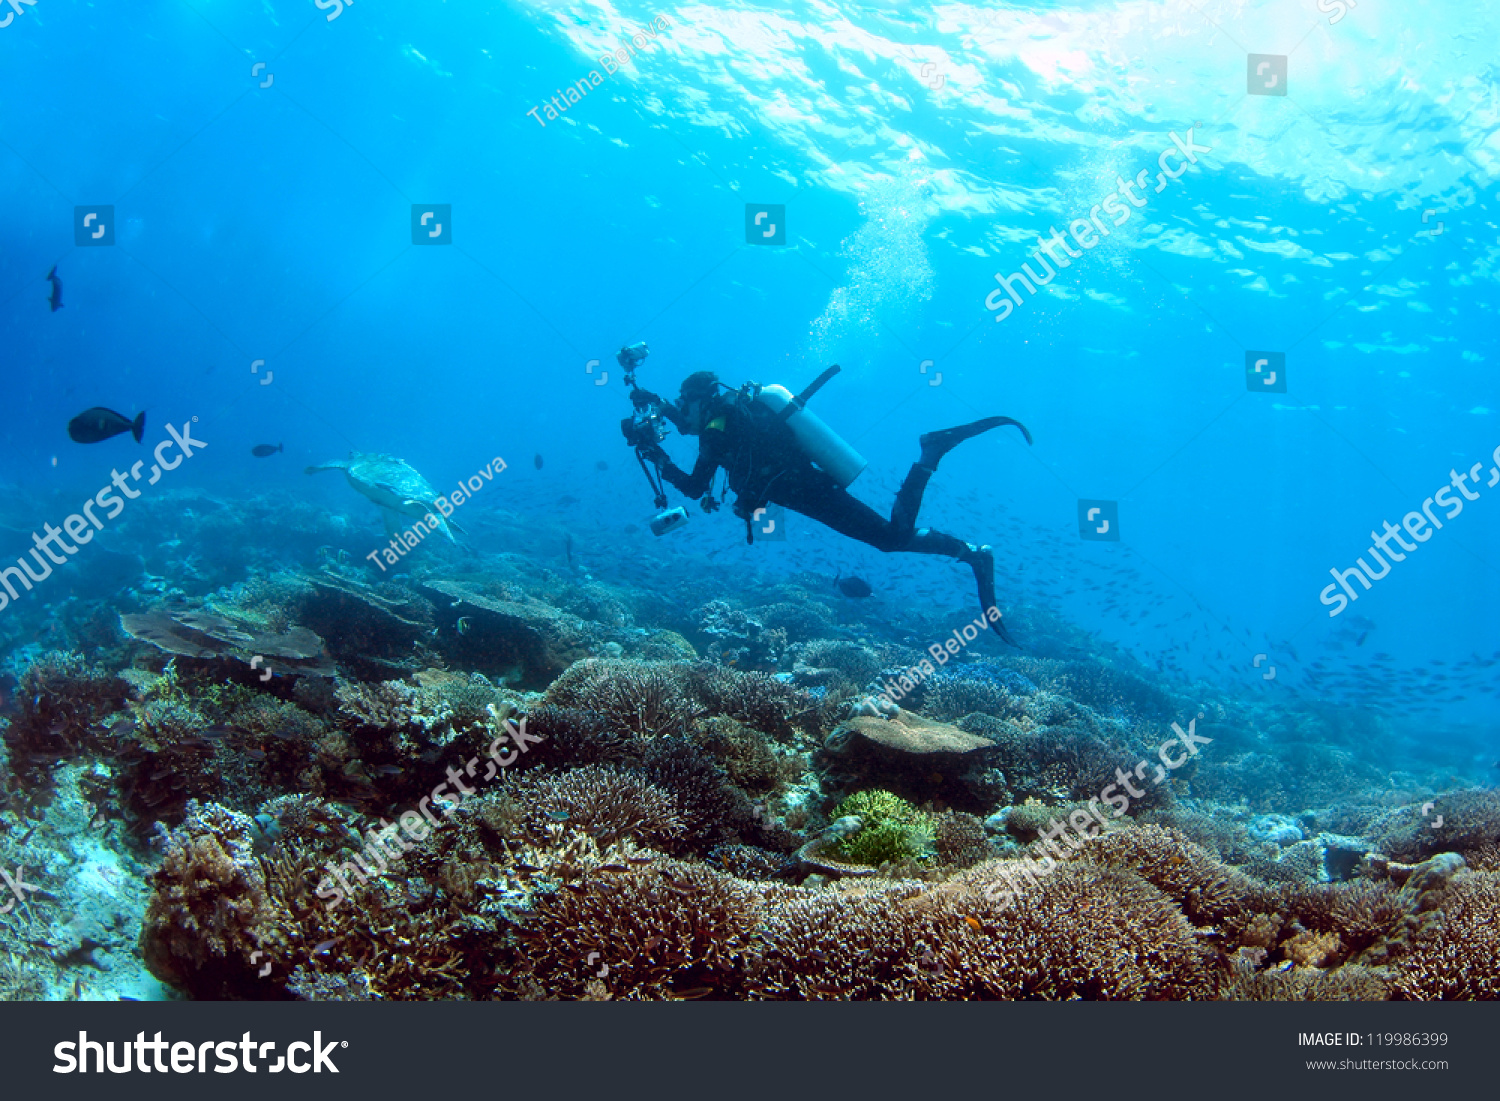 Underwater cameraman enjoys a scuba dive on a coral reef #119986399